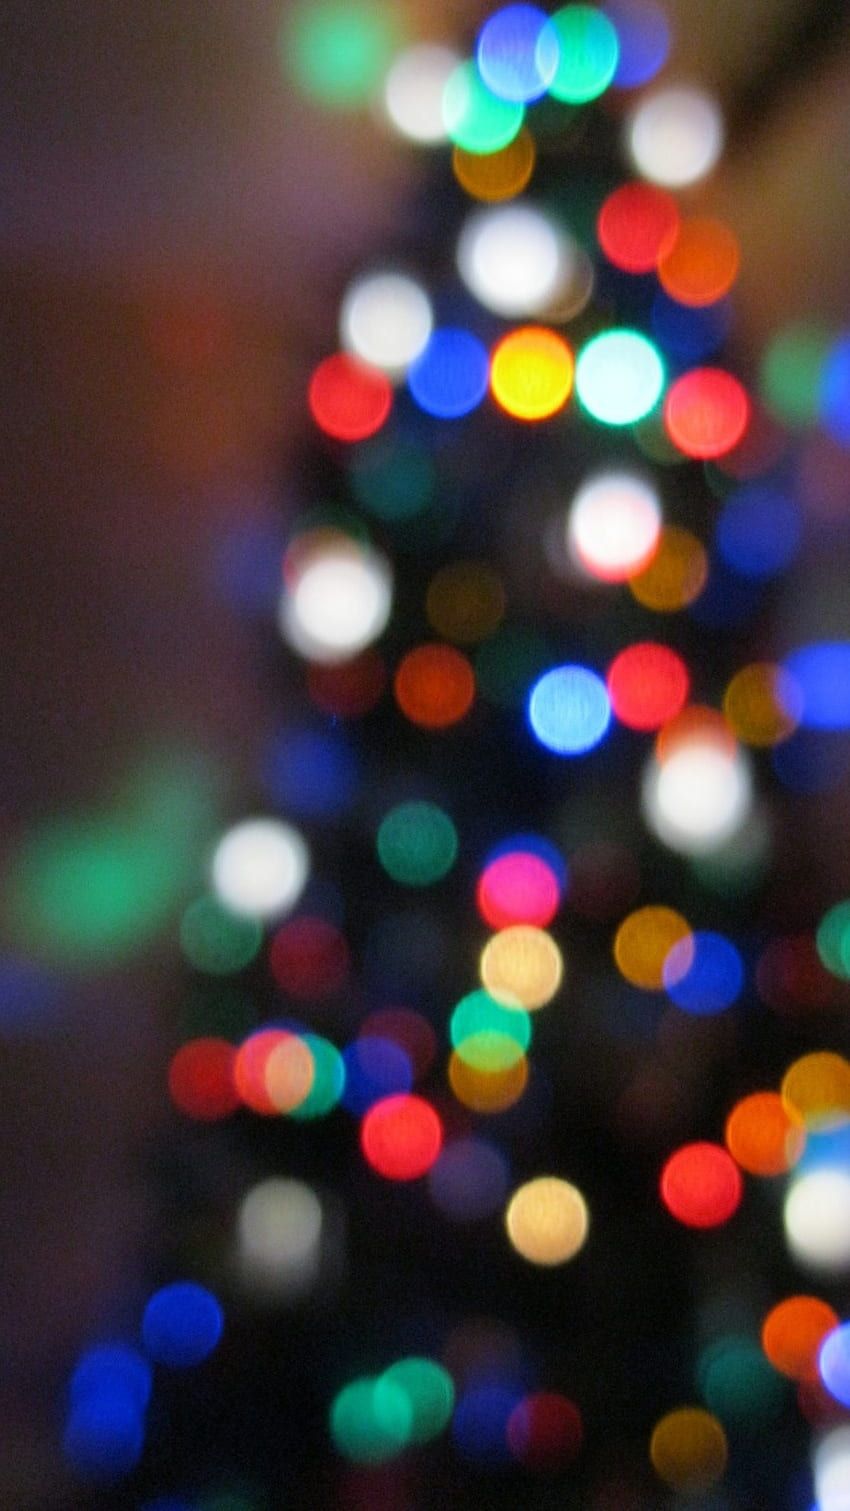 A close up of a blurred Christmas tree with colored lights. - Christmas lights